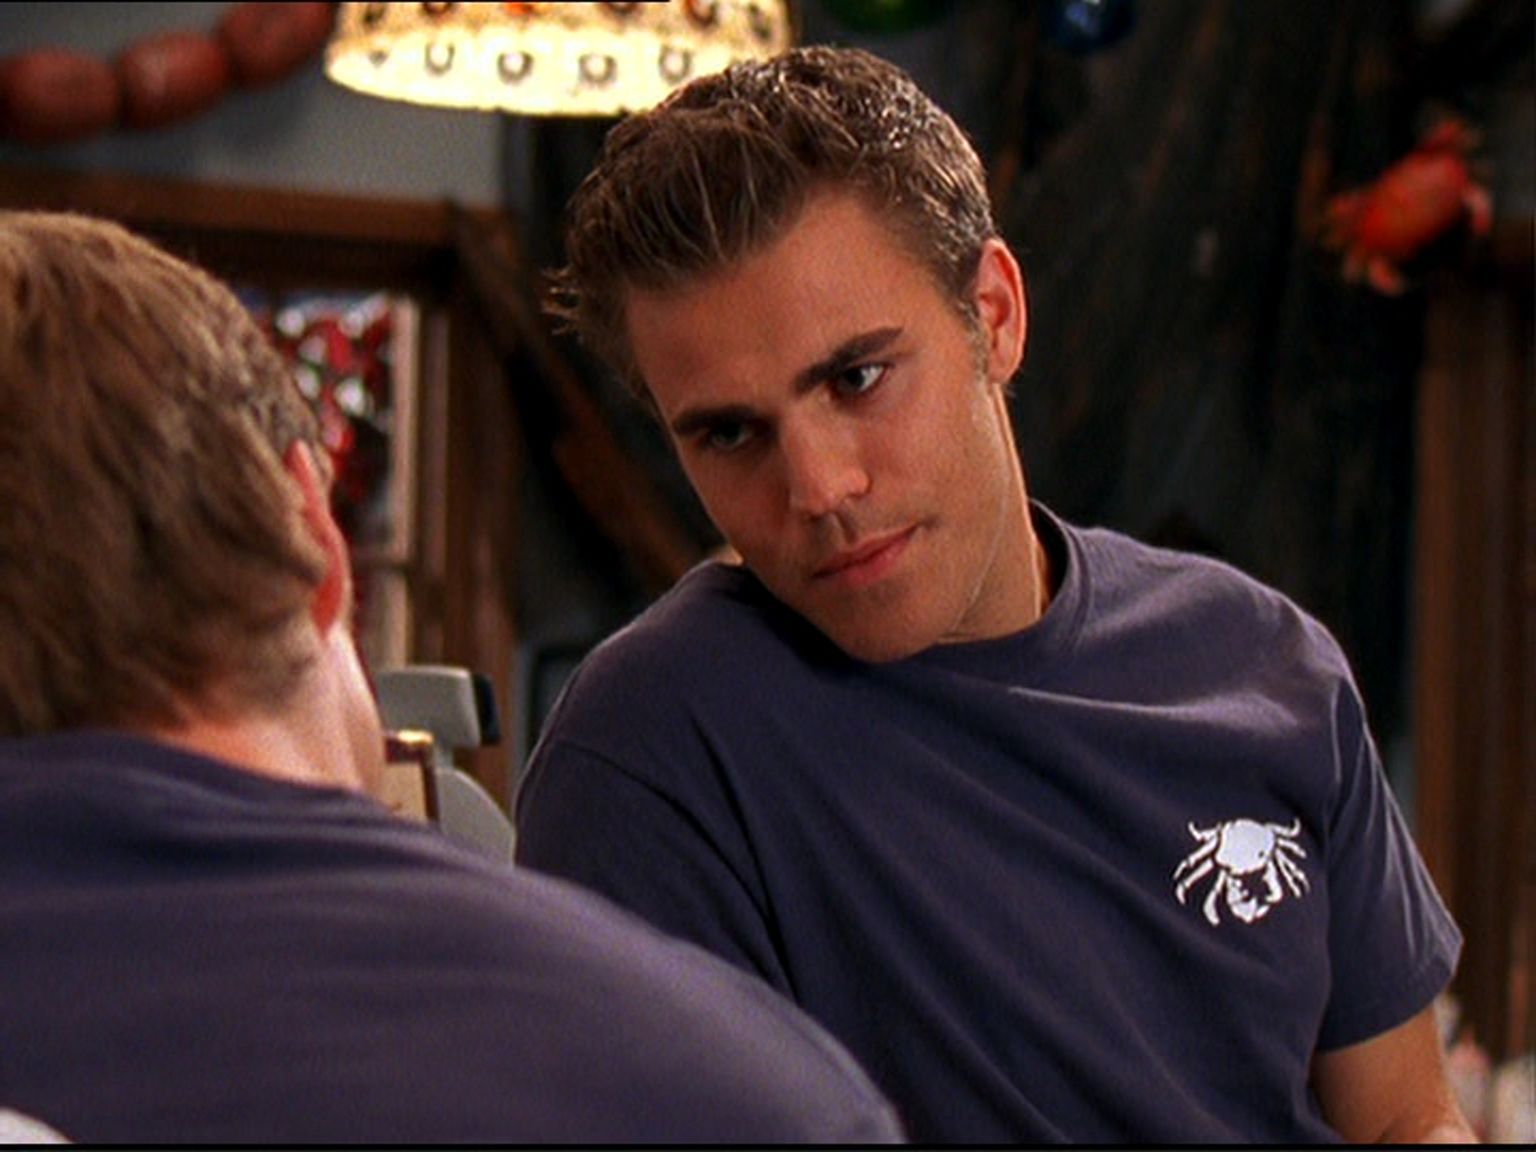 Paul Wesley Image: Paul as Donnie in the OC - ep 1x05: The Outsiders.